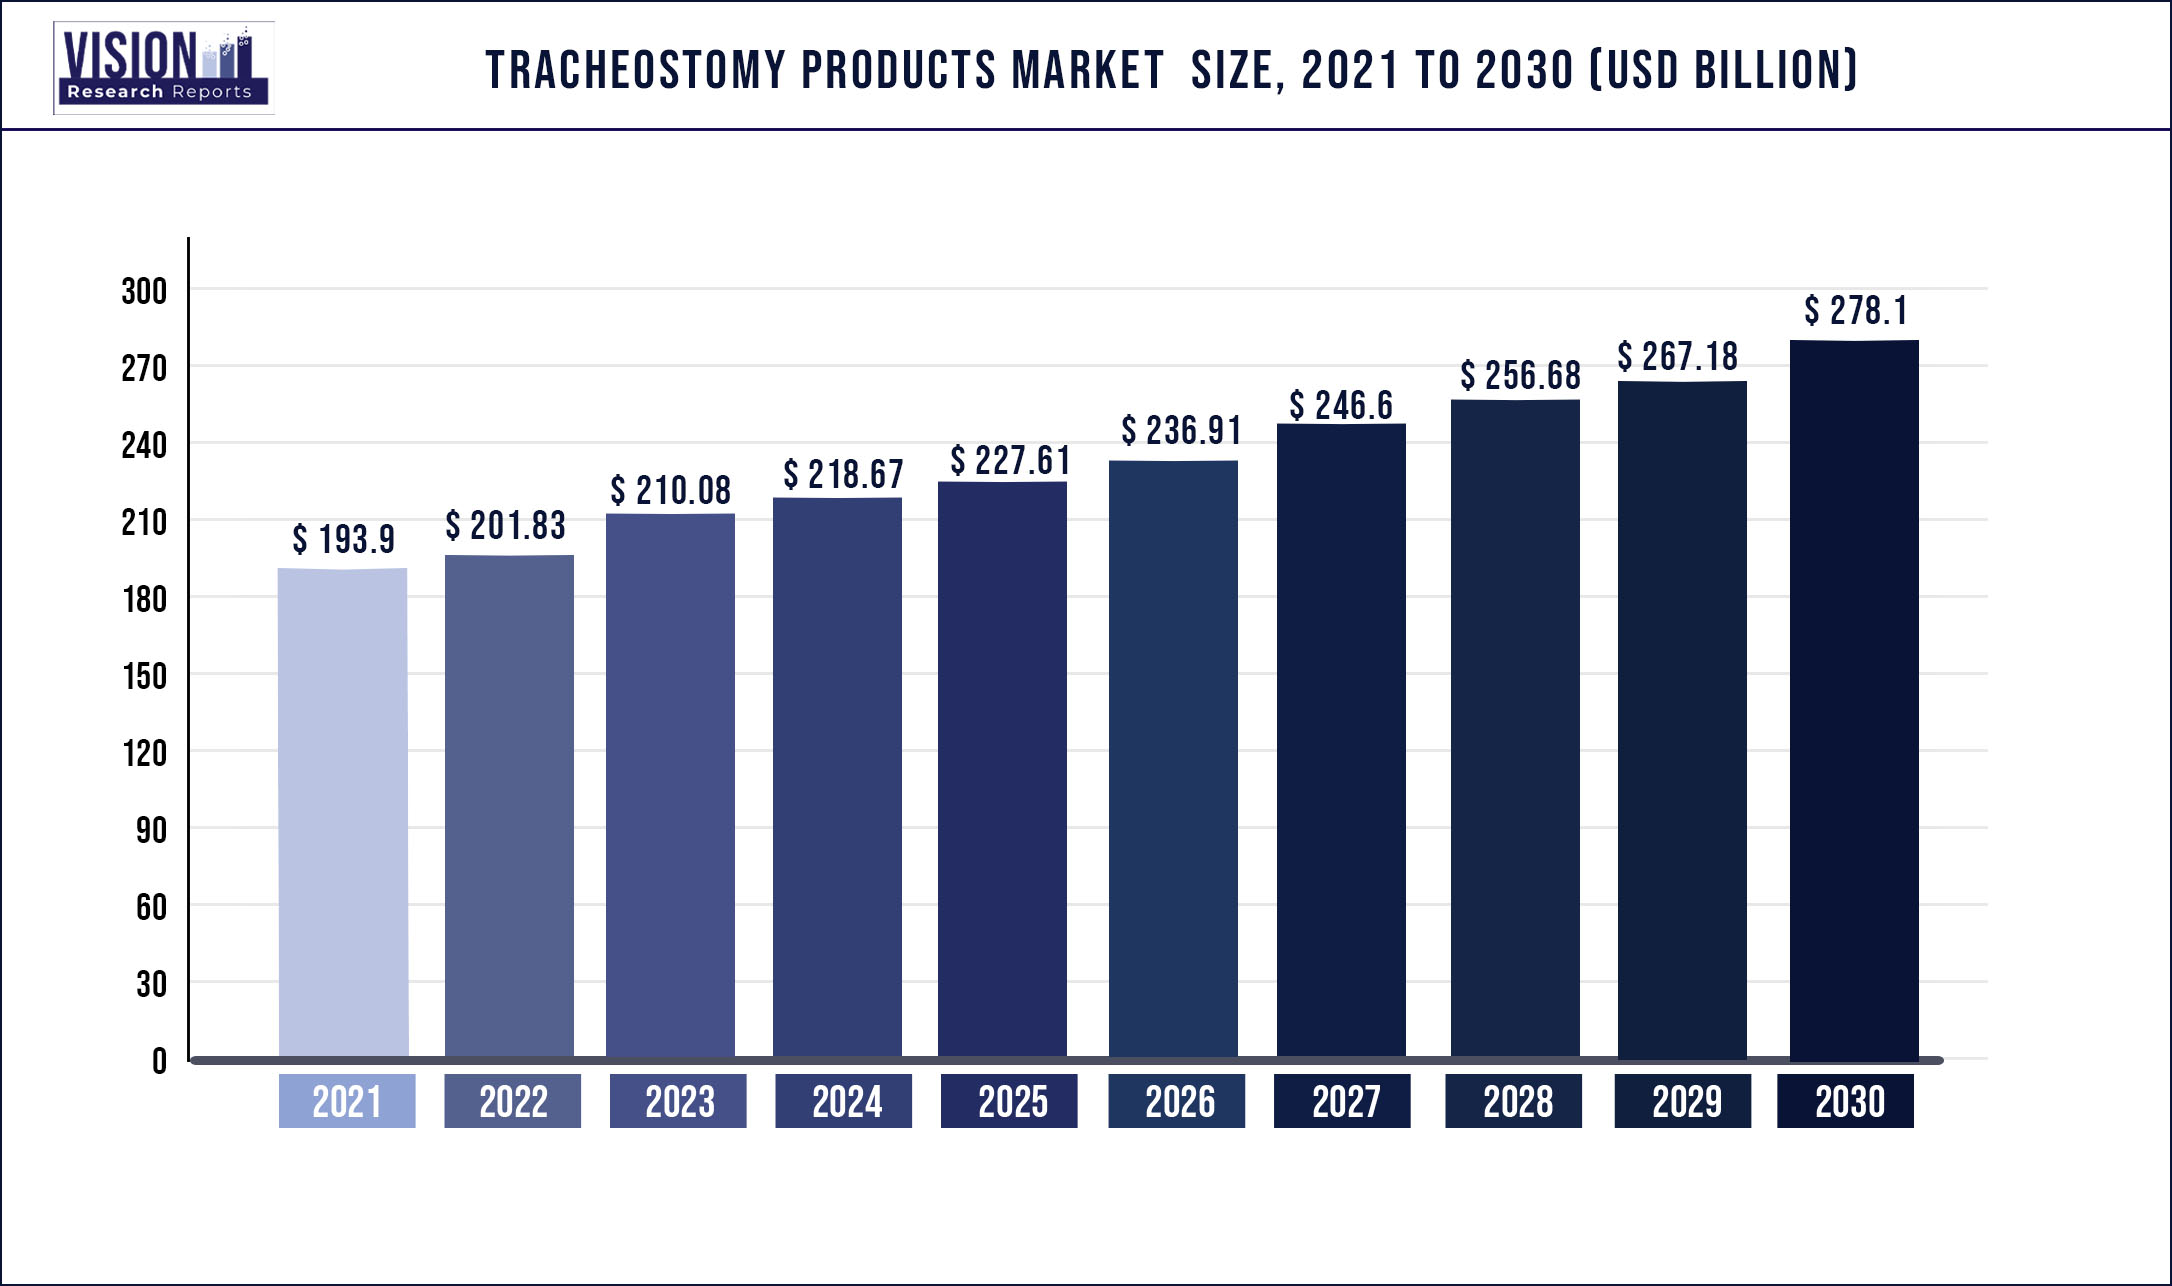 Tracheostomy Products Market Size 2021 to 2030